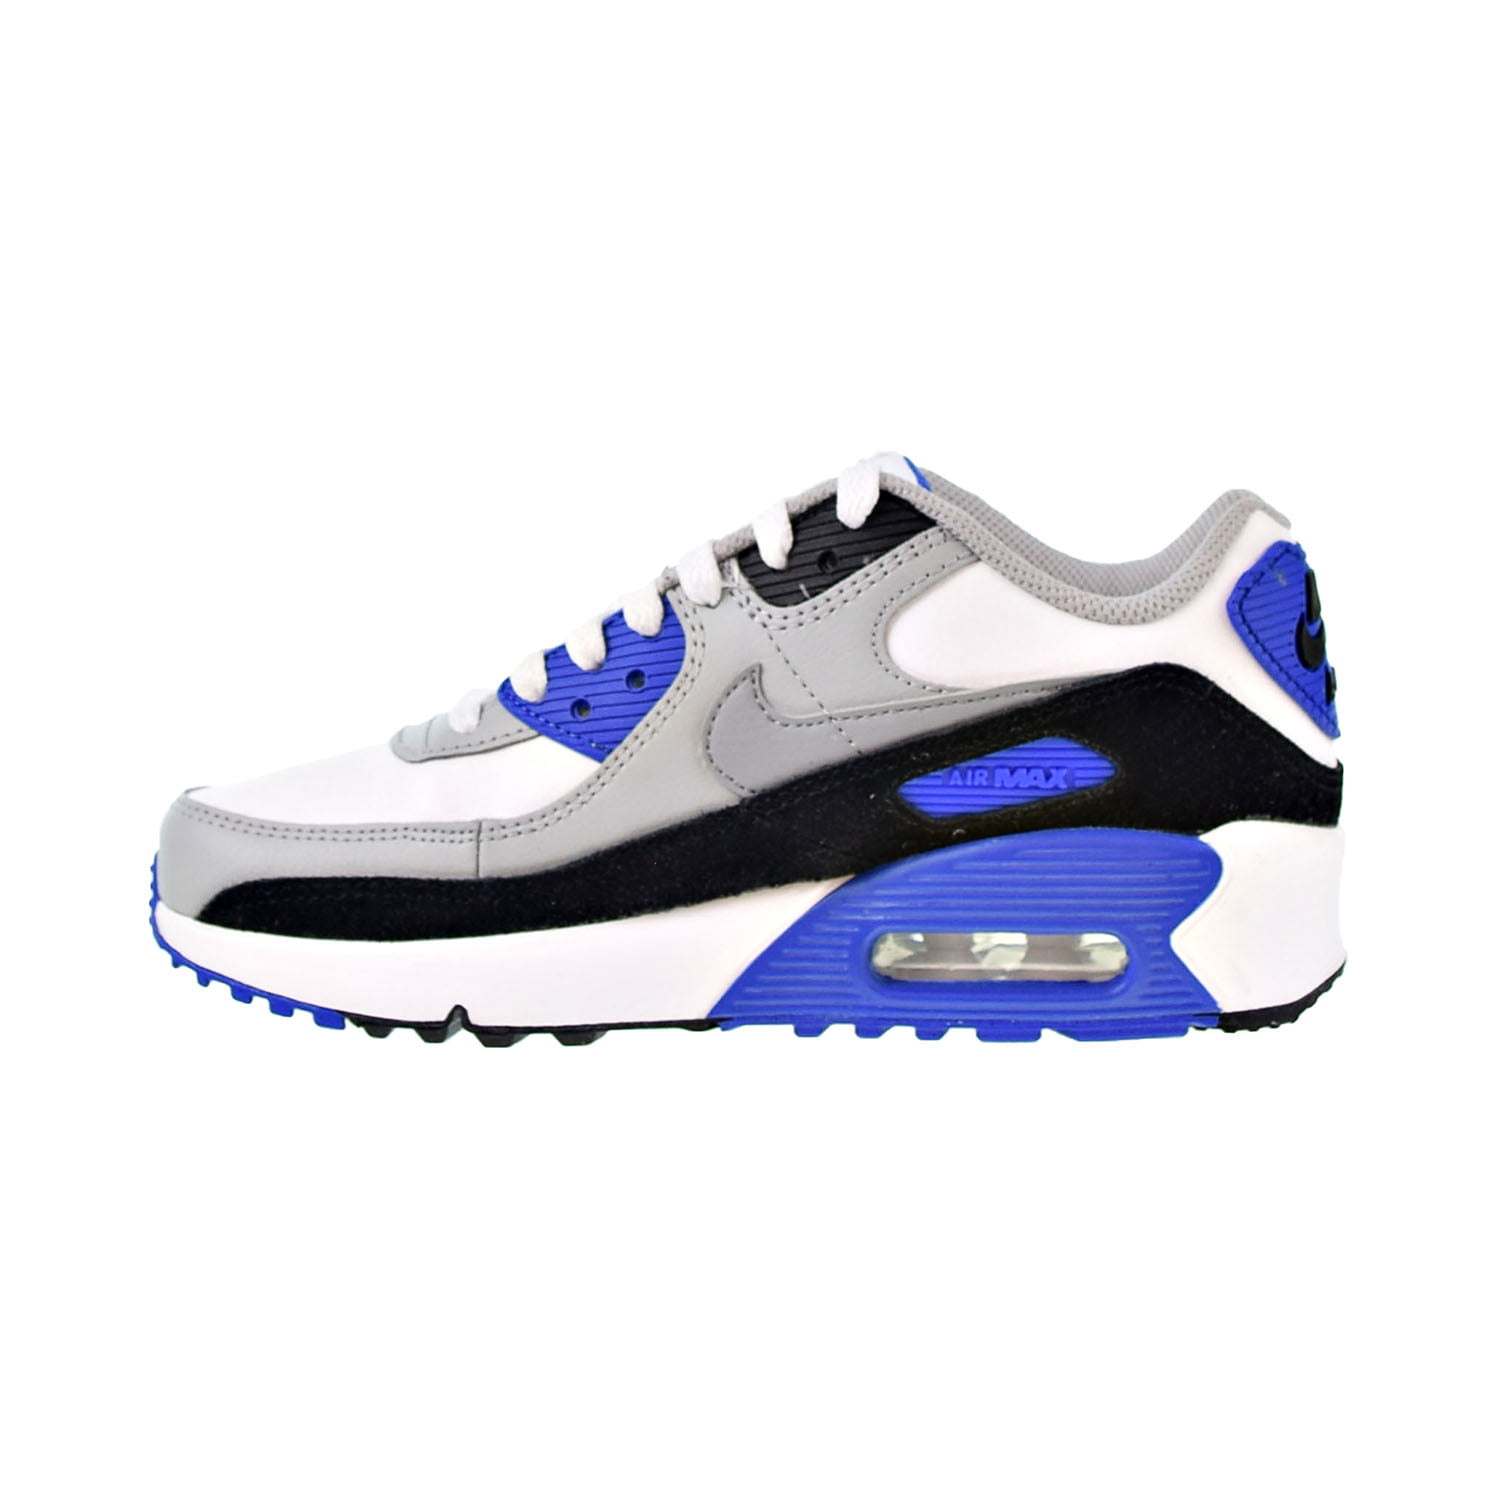 Nike Air Max 90 LTR Big Kids' Shoes White-Particle Grey-Navy 